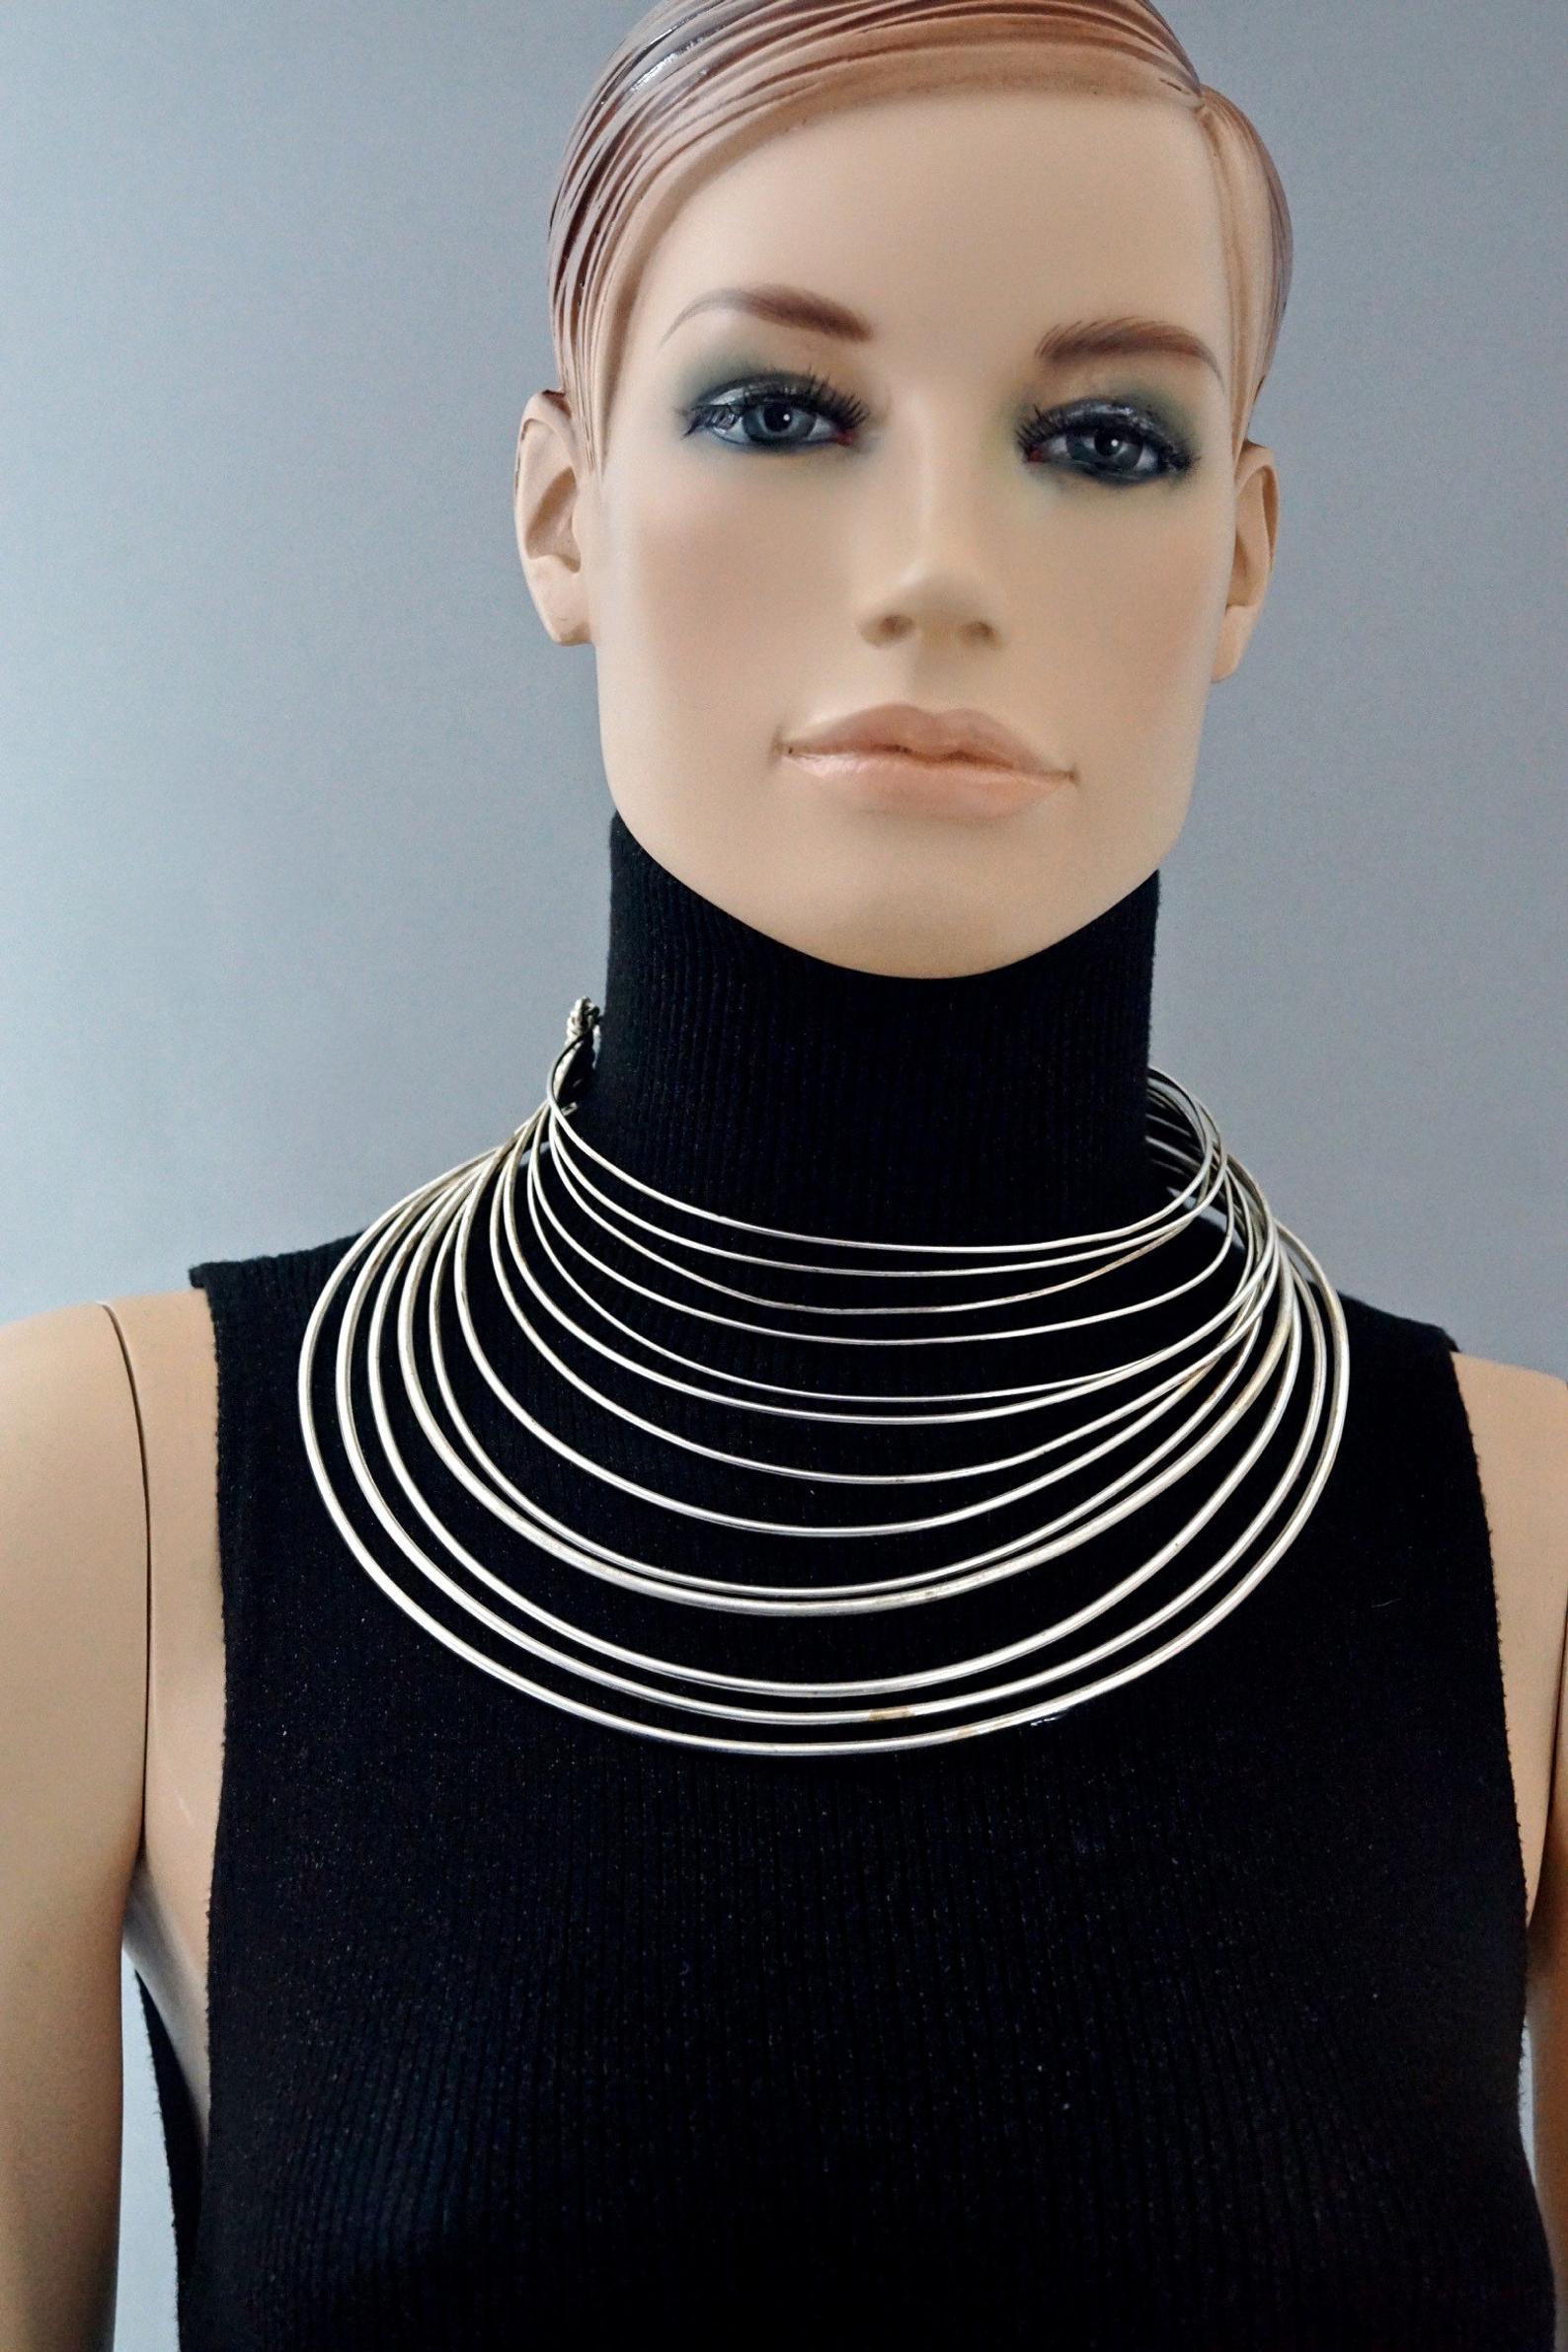 Vintage JEAN PAUL GAULTIER Masai Multi Wire Silver Choker Necklace

Measurements:
Total Wearable Circumference: 15.74 inches (40 cm)
Opening: 4.13 inches (10.5 cm)

Features:
- 100% Authentic JEAN PAUL GAULTIER.
- Multiple layer of rigid wires.
-